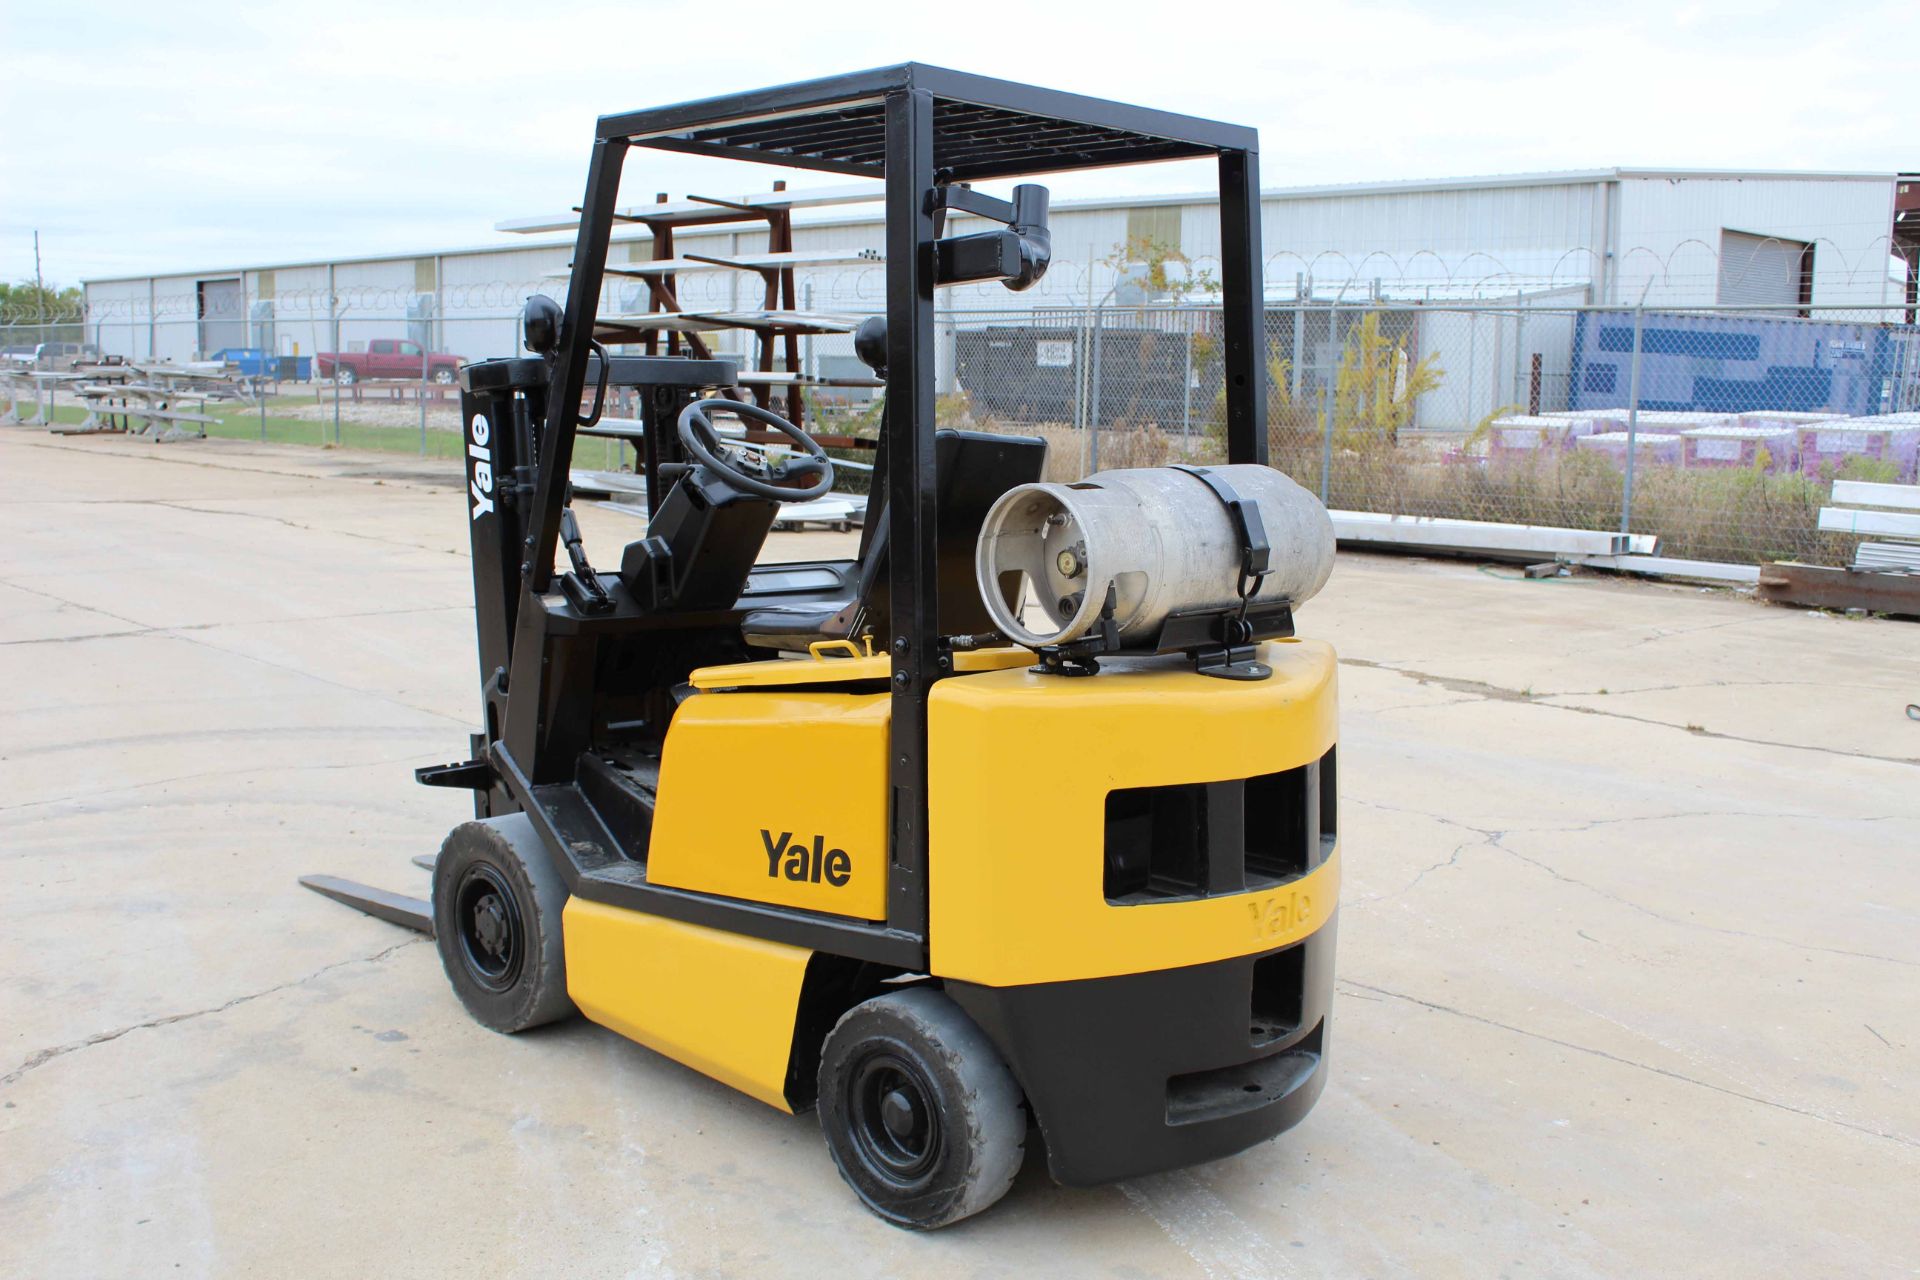 FORKLIFT, YALE 3,000 LB. CAP. MDL. GLP030, new 2000, LPG engine, 83” compact style mast, pneu. style - Image 4 of 10